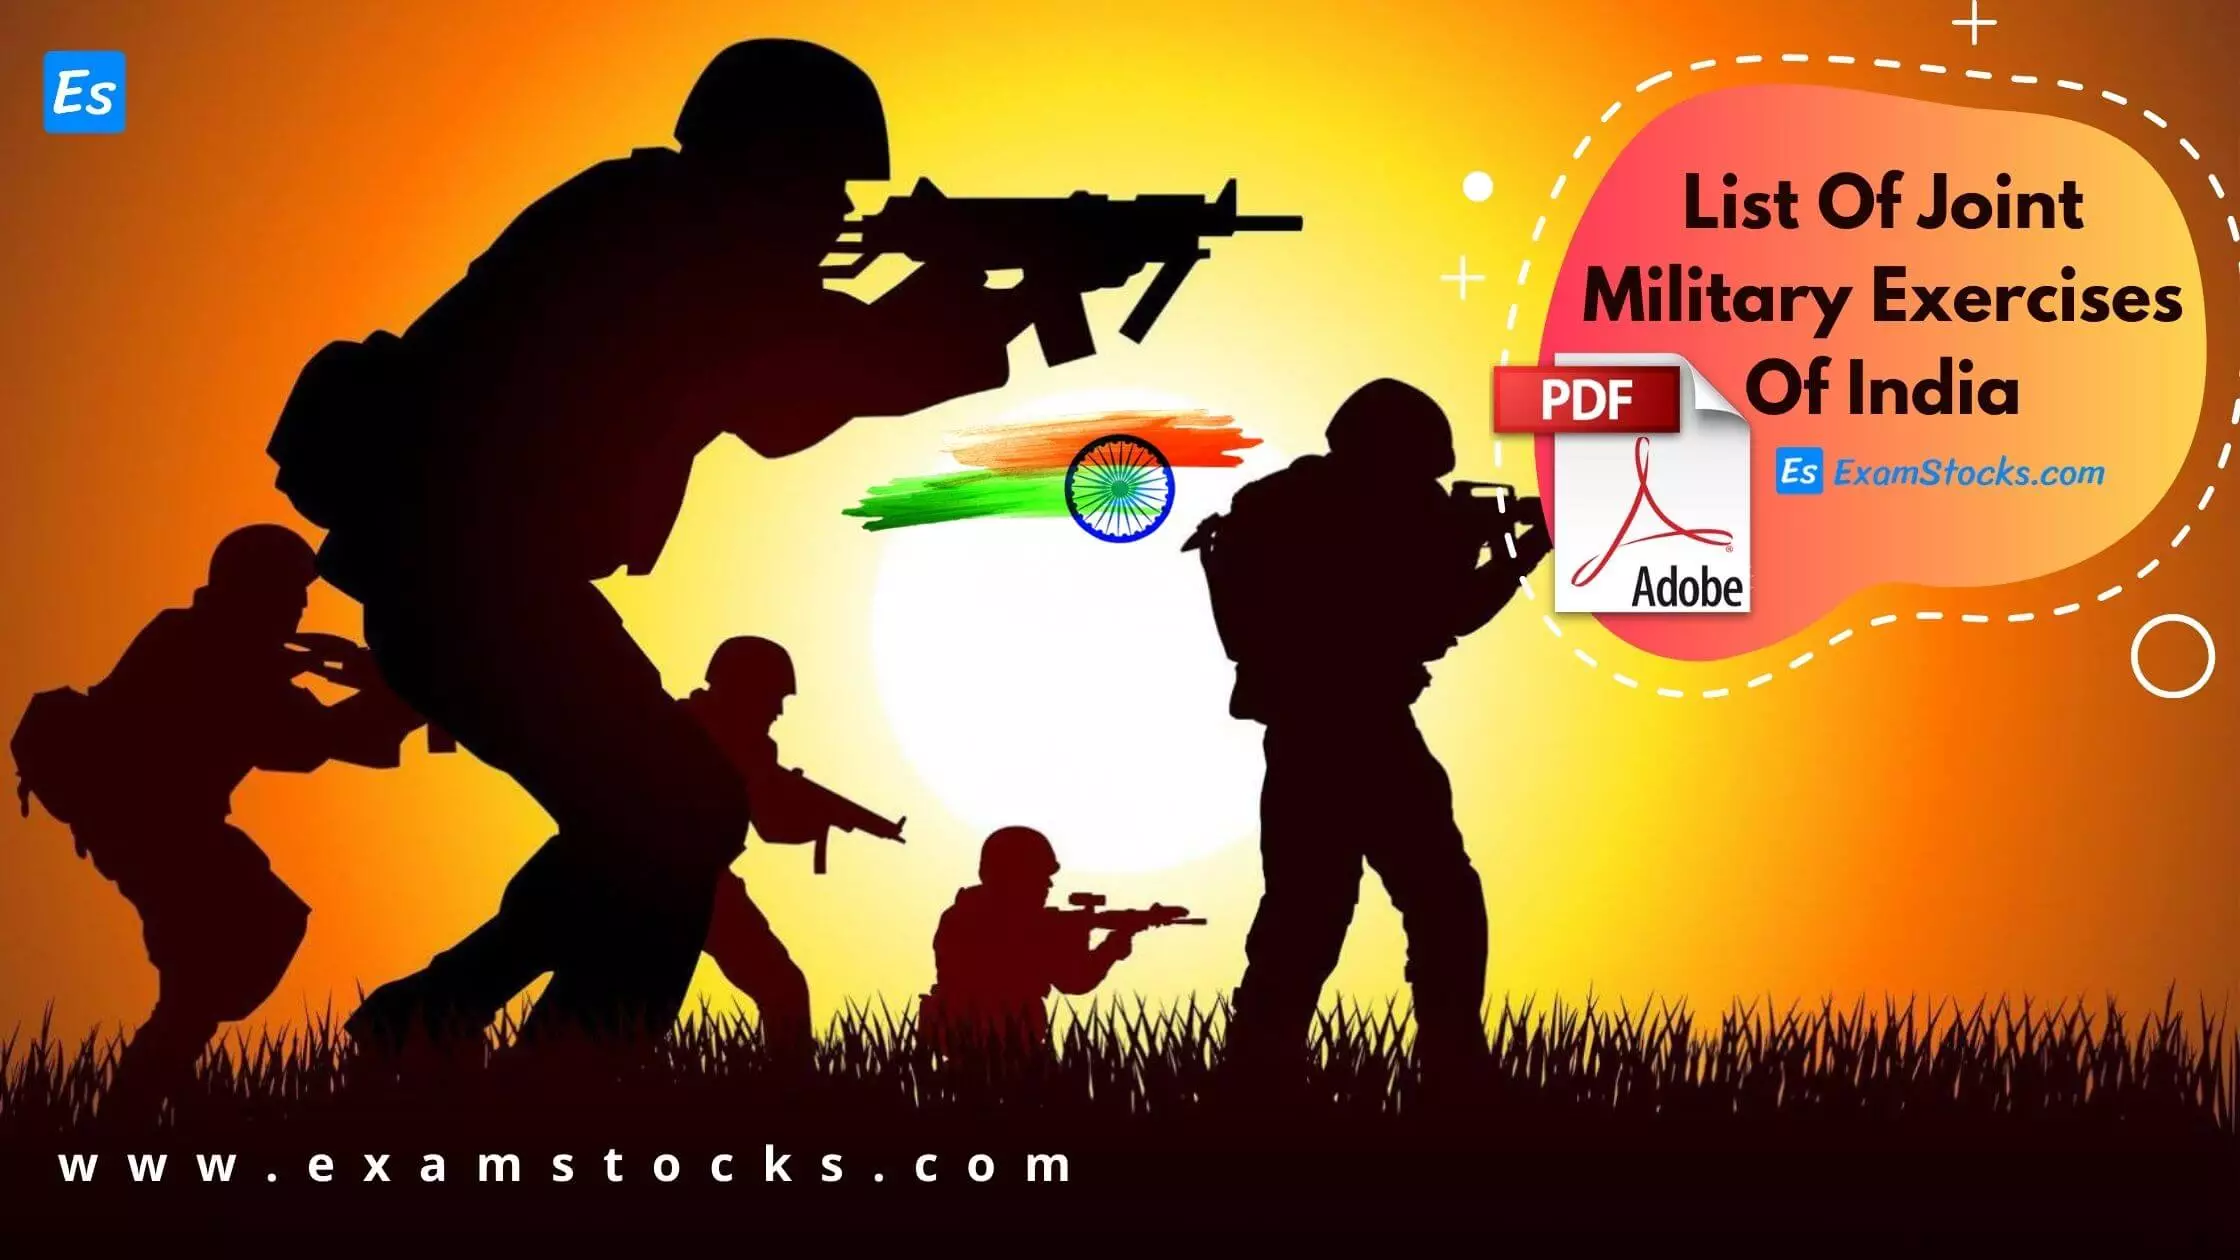 List Of Joint Military Exercises Of India PDF